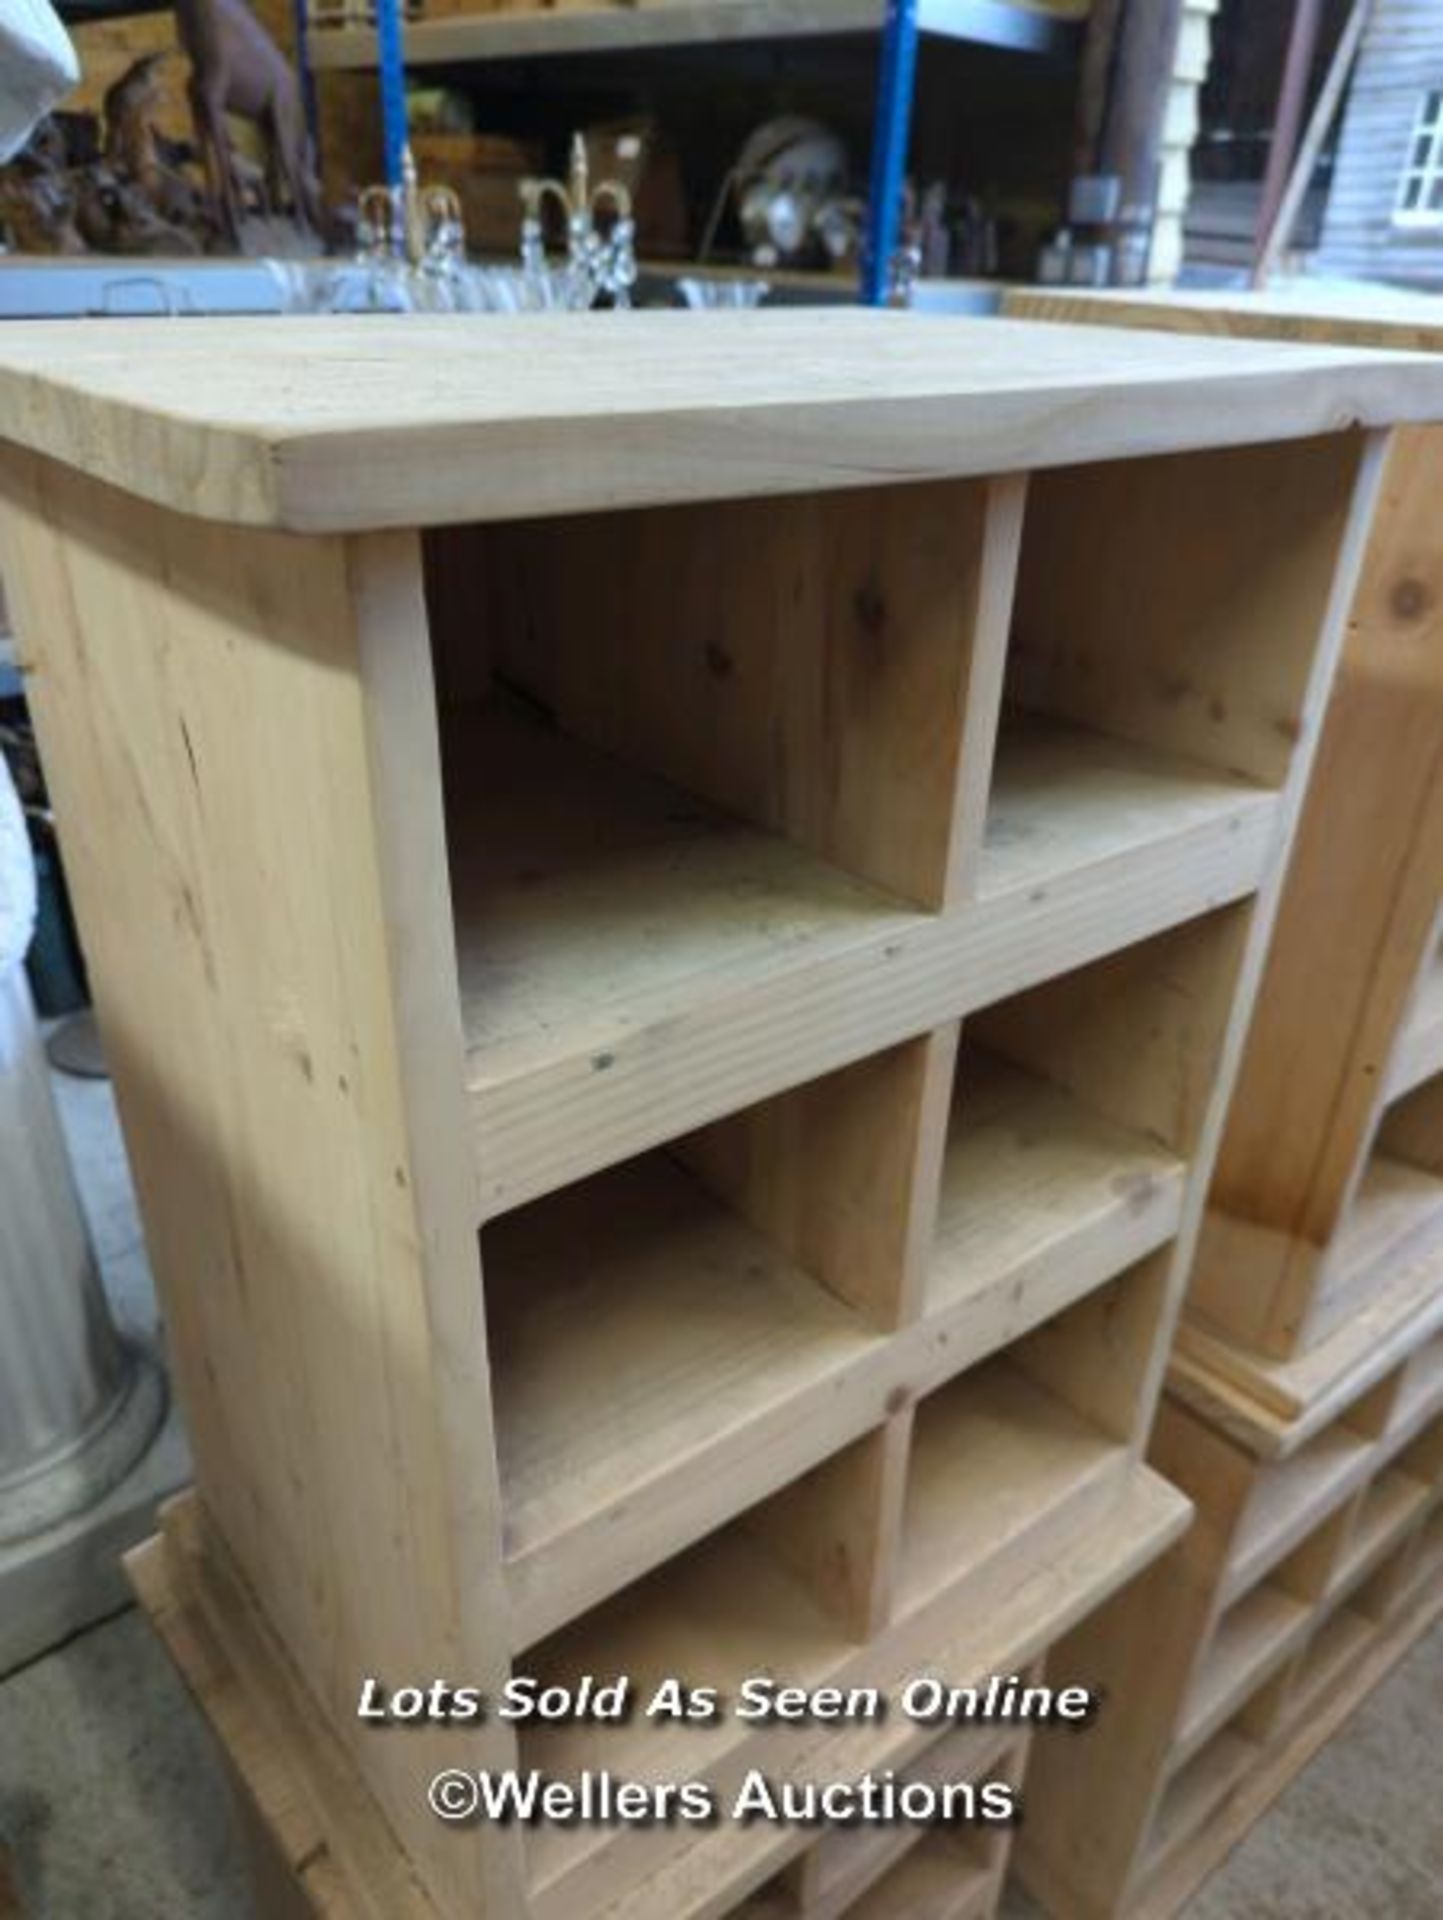 *PAIR OF PINE STORAGE SHELVES WITH SIX COMPARTMENTS, 26 HIGH X 19.5 WIDE X 15 DEEP / ALL LOTS ARE - Image 3 of 3